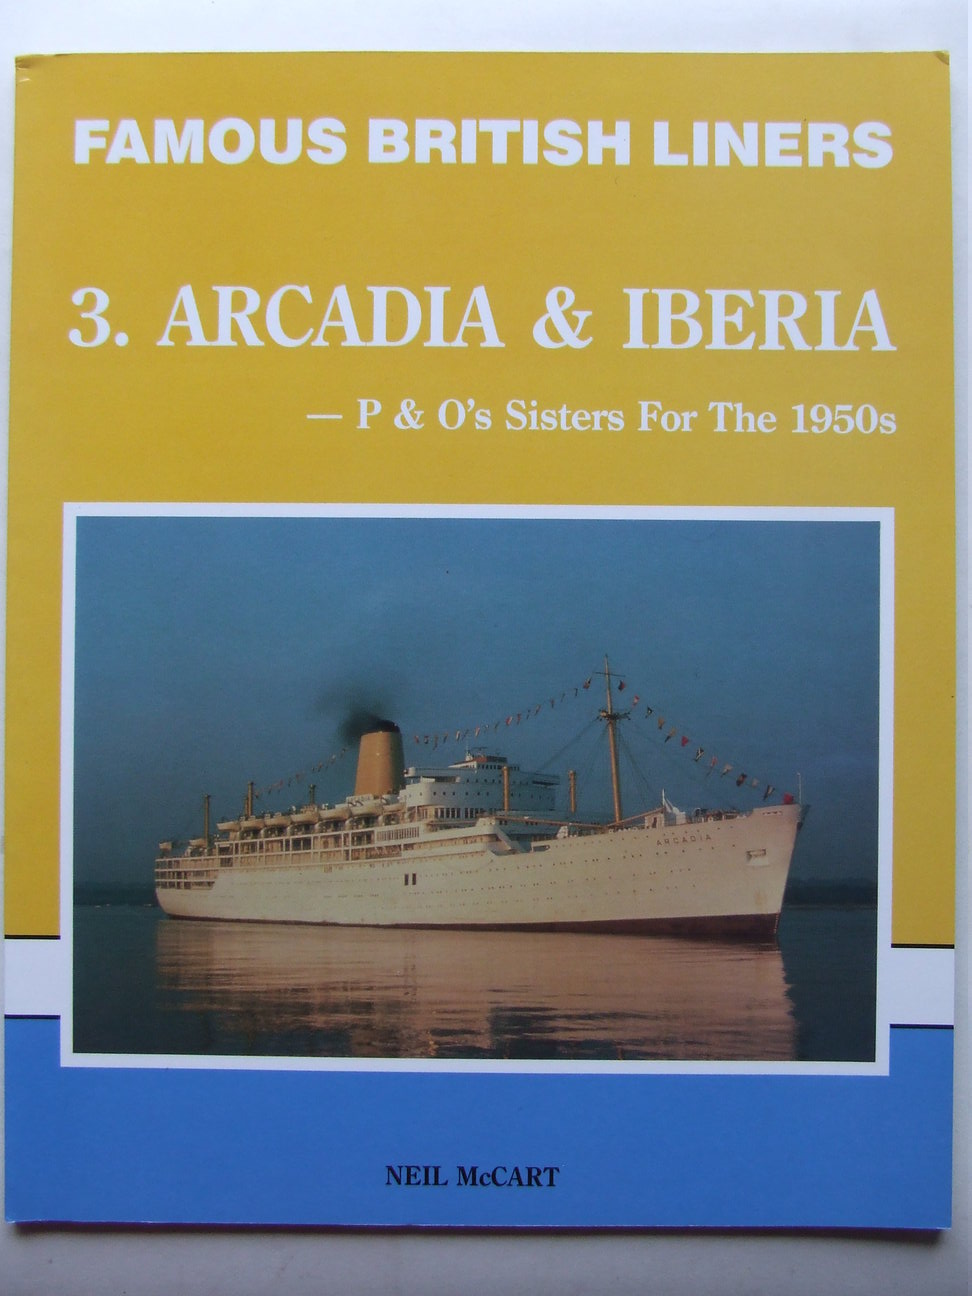 Famous British Liners, 3 - Arcadia & Iberia, P&O's sisters for the 1950's